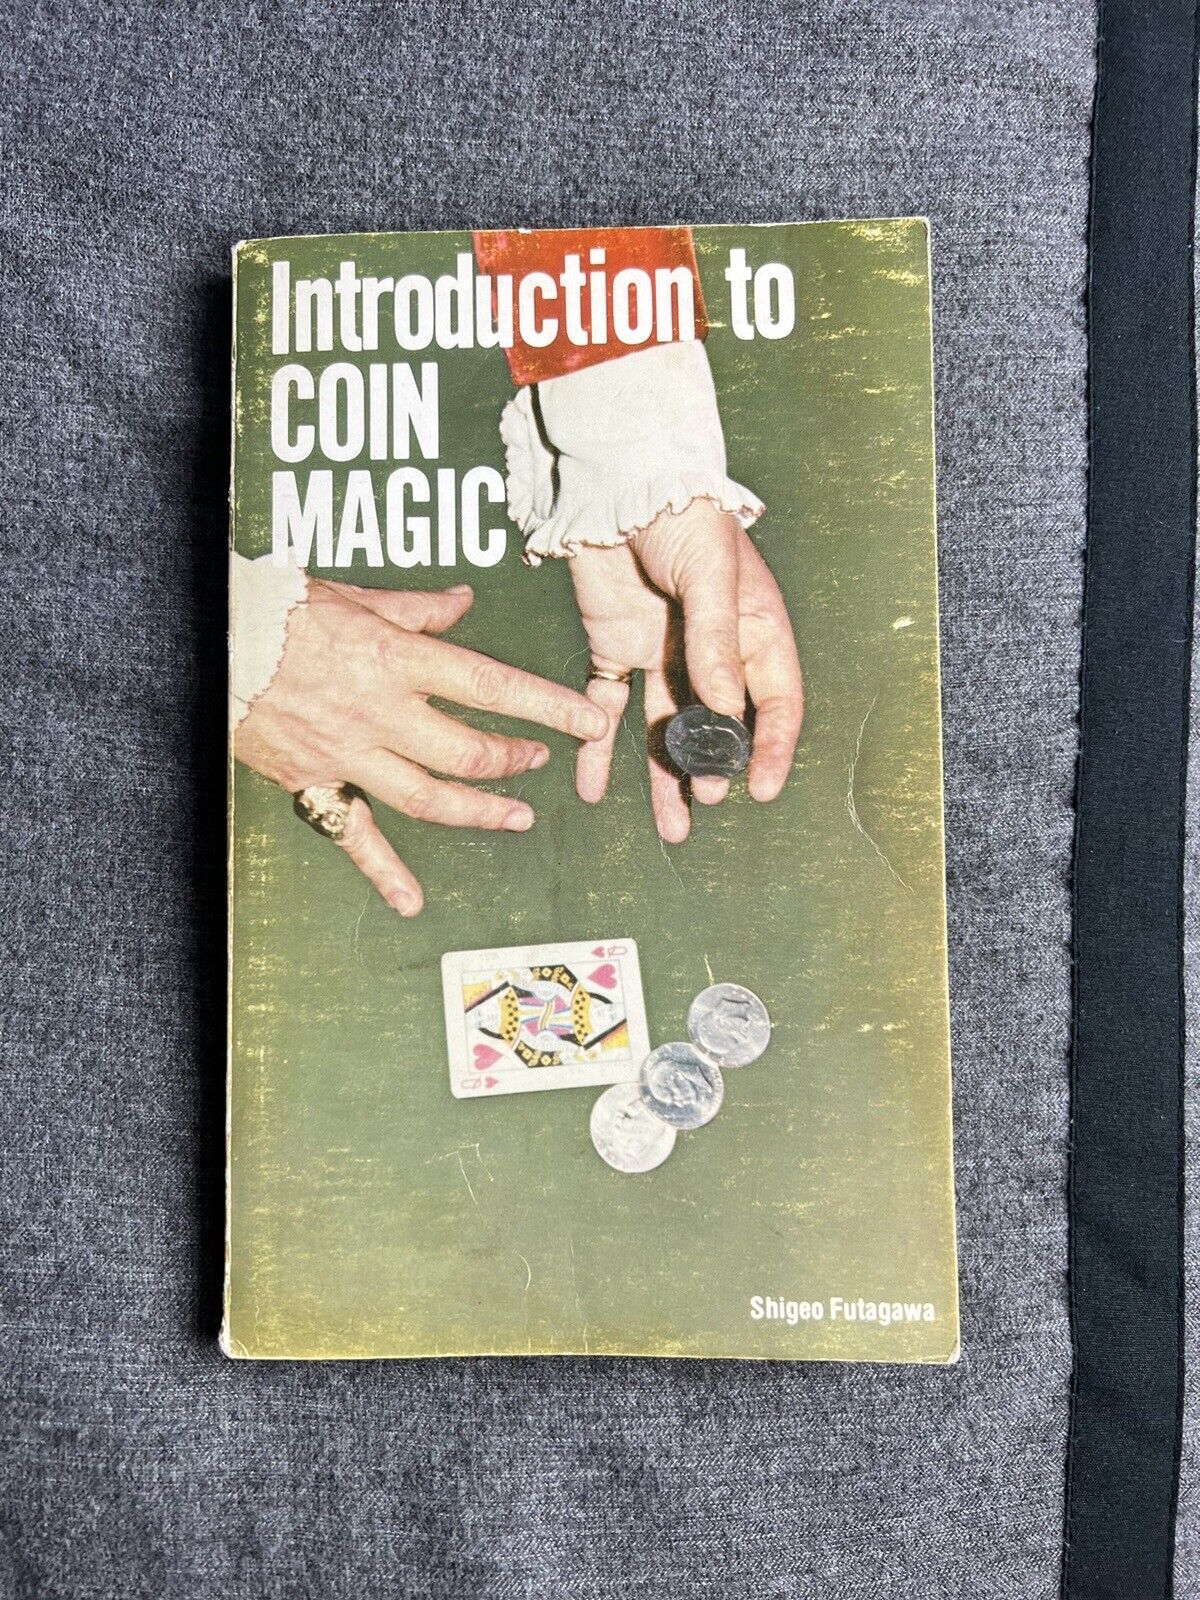 🔥EXTREMELY RARE Introduction to Coin Magic-by Shigeo Futagawa Coin Magic🔥🔥